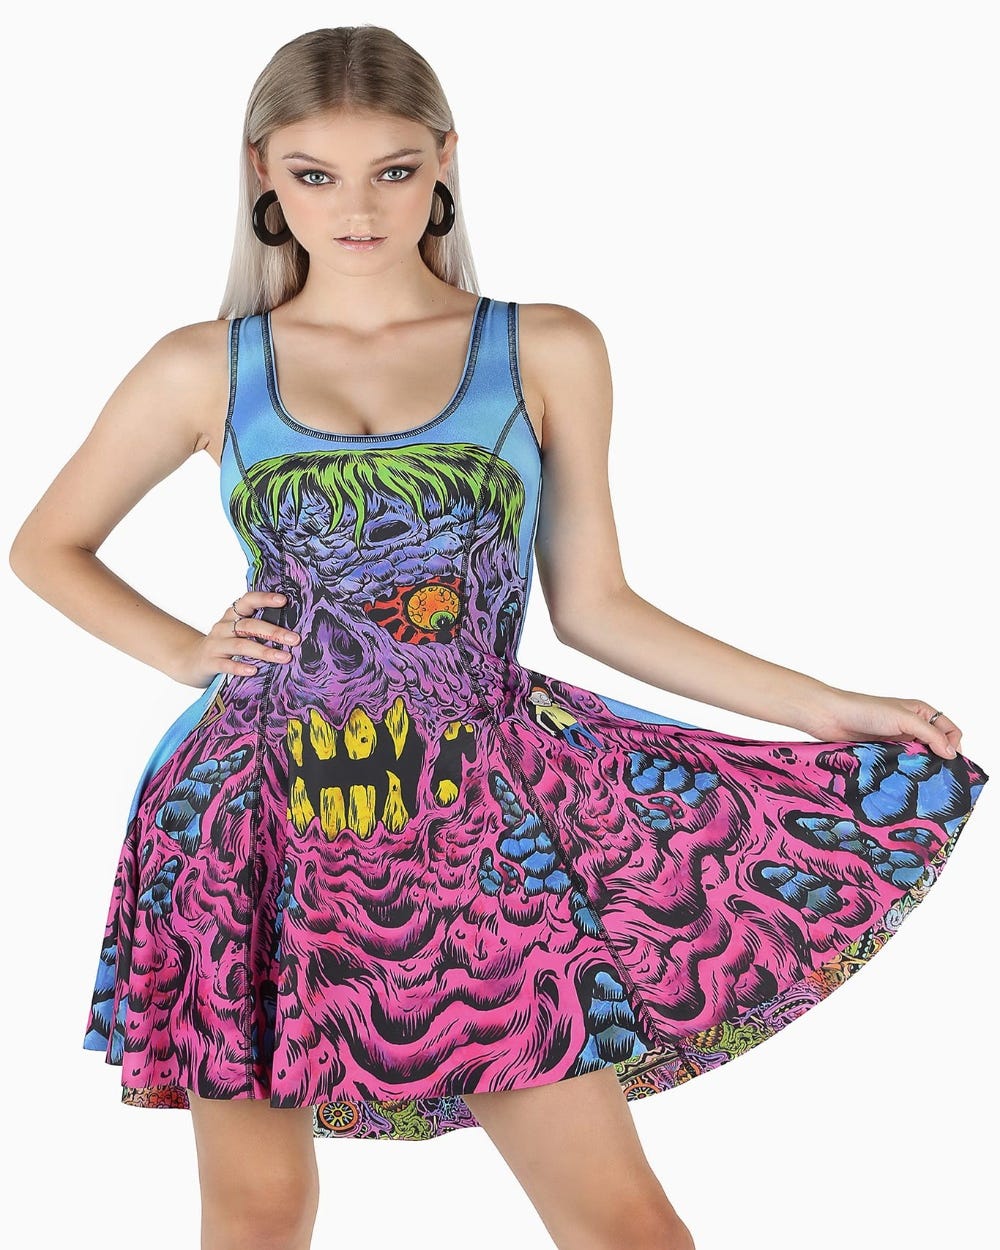 Monster Trouble Vs Monster Rick And Morty Inside Out Dress - Limited